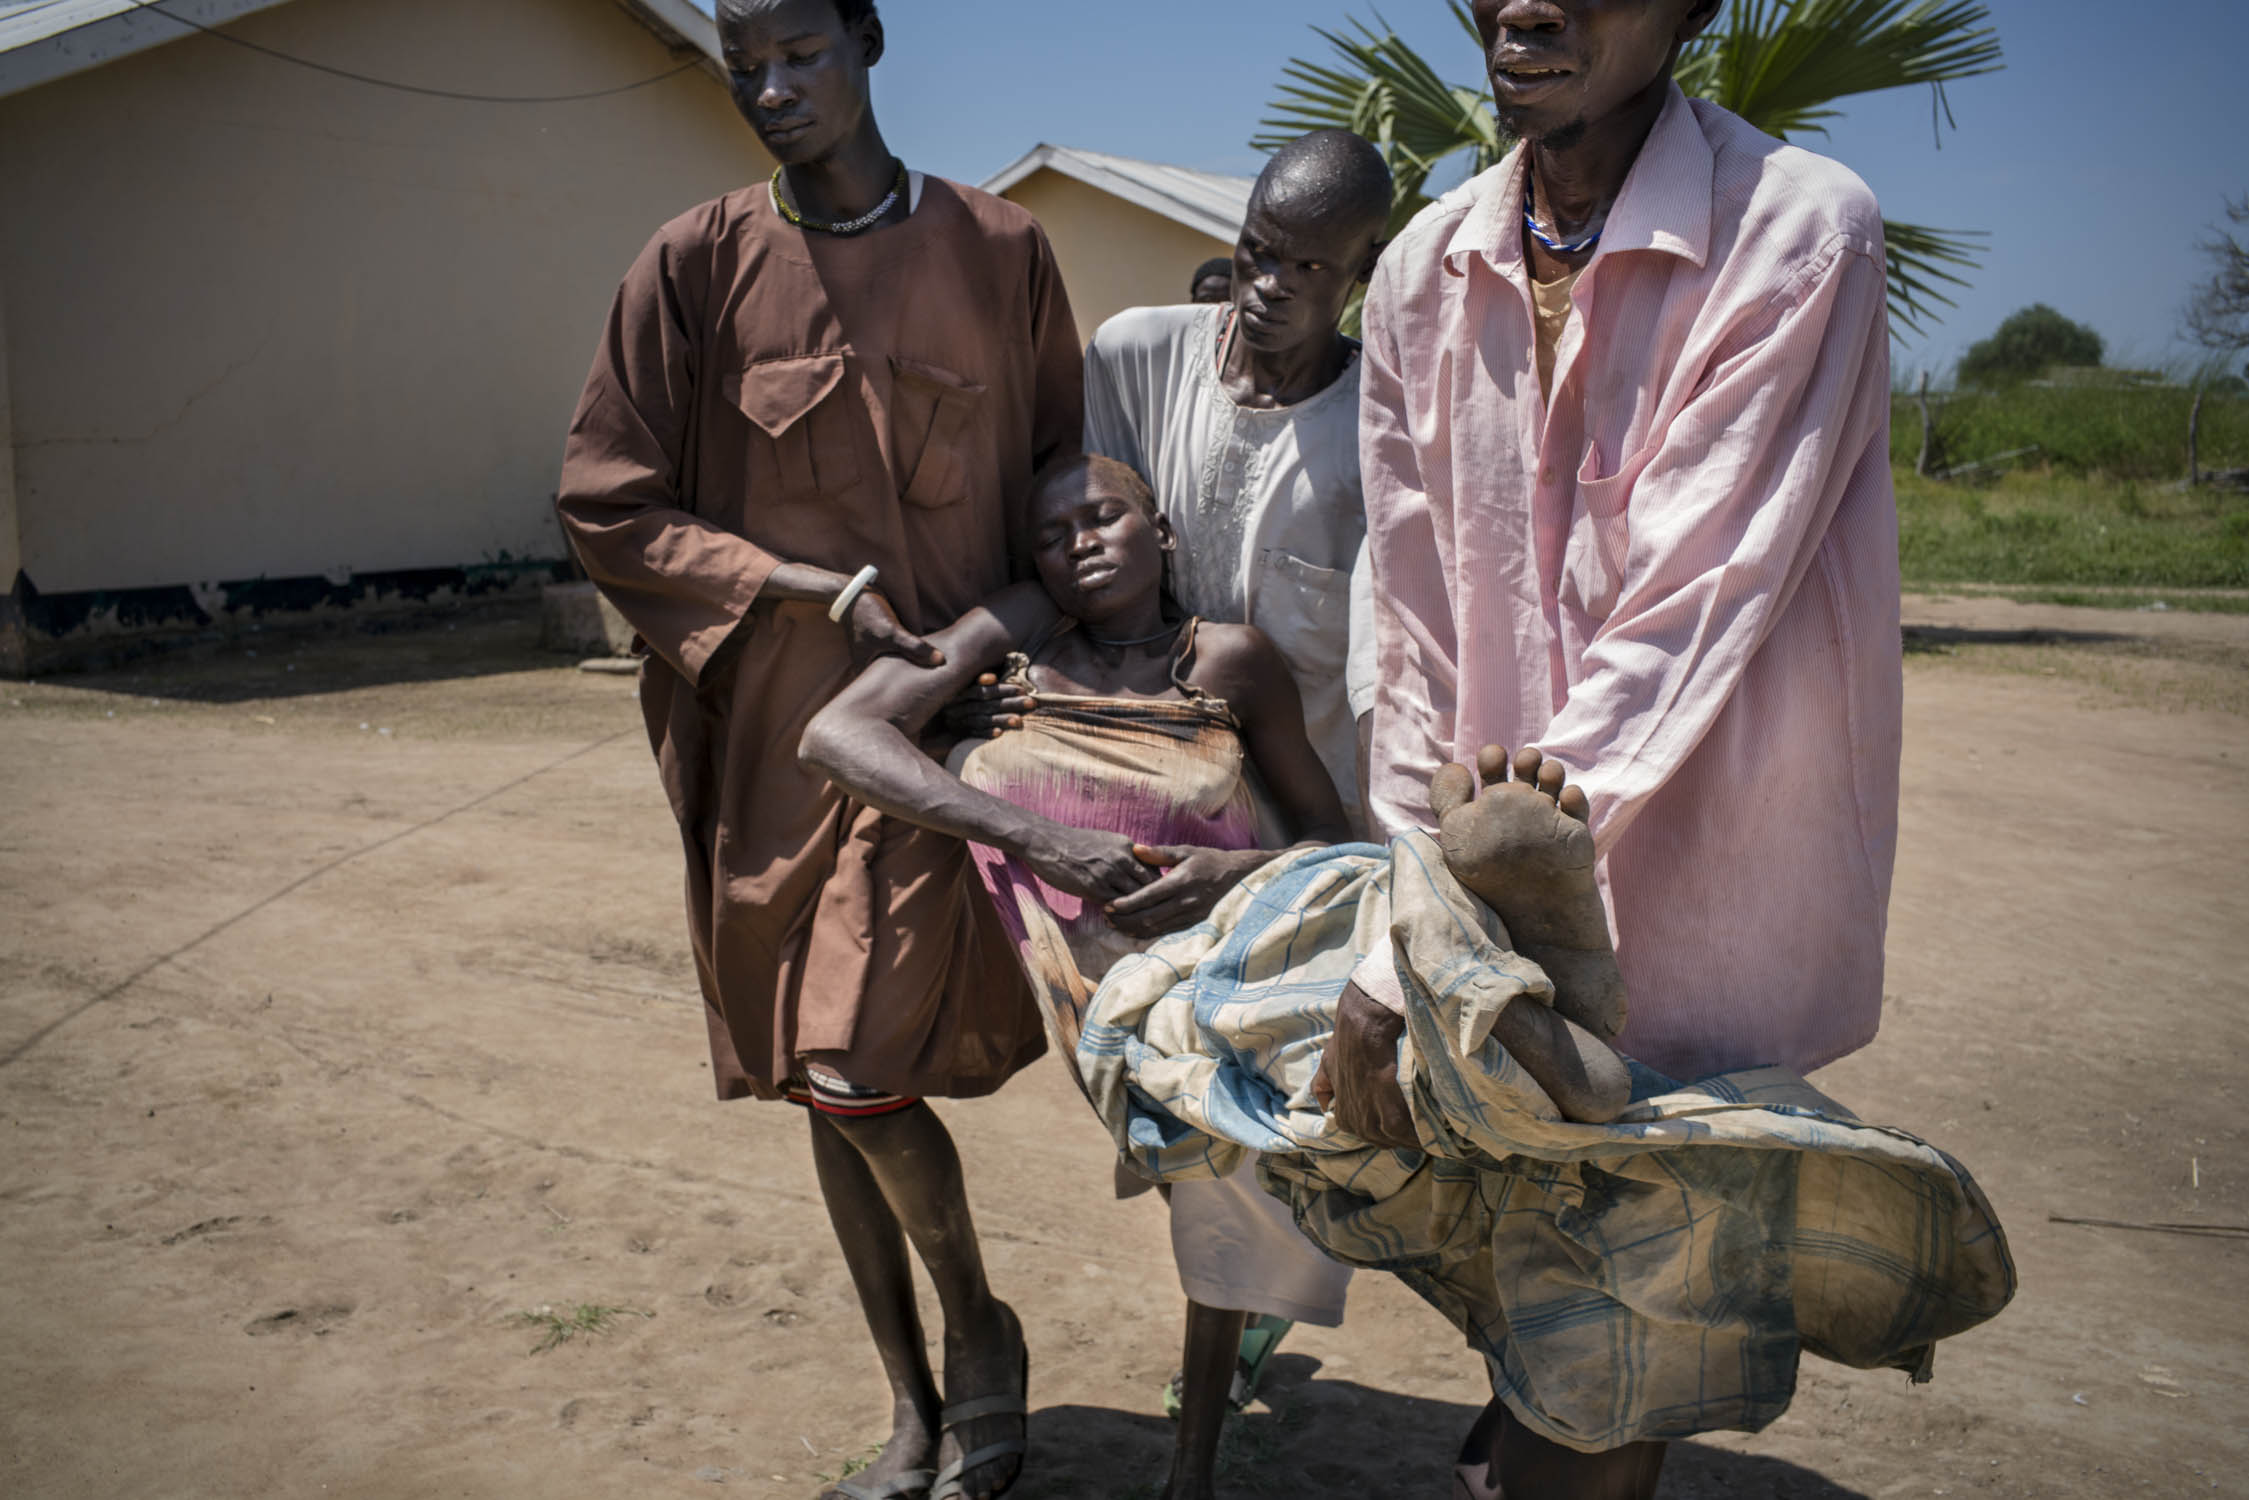  Arek Nuoi, 32,&nbsp;is carried unconscious by her three brother-in-laws to a ward at a government-run health care center, where she will receive urgent treatment for acute malaria. Her brother-in-laws transported Arek from their home village by plac